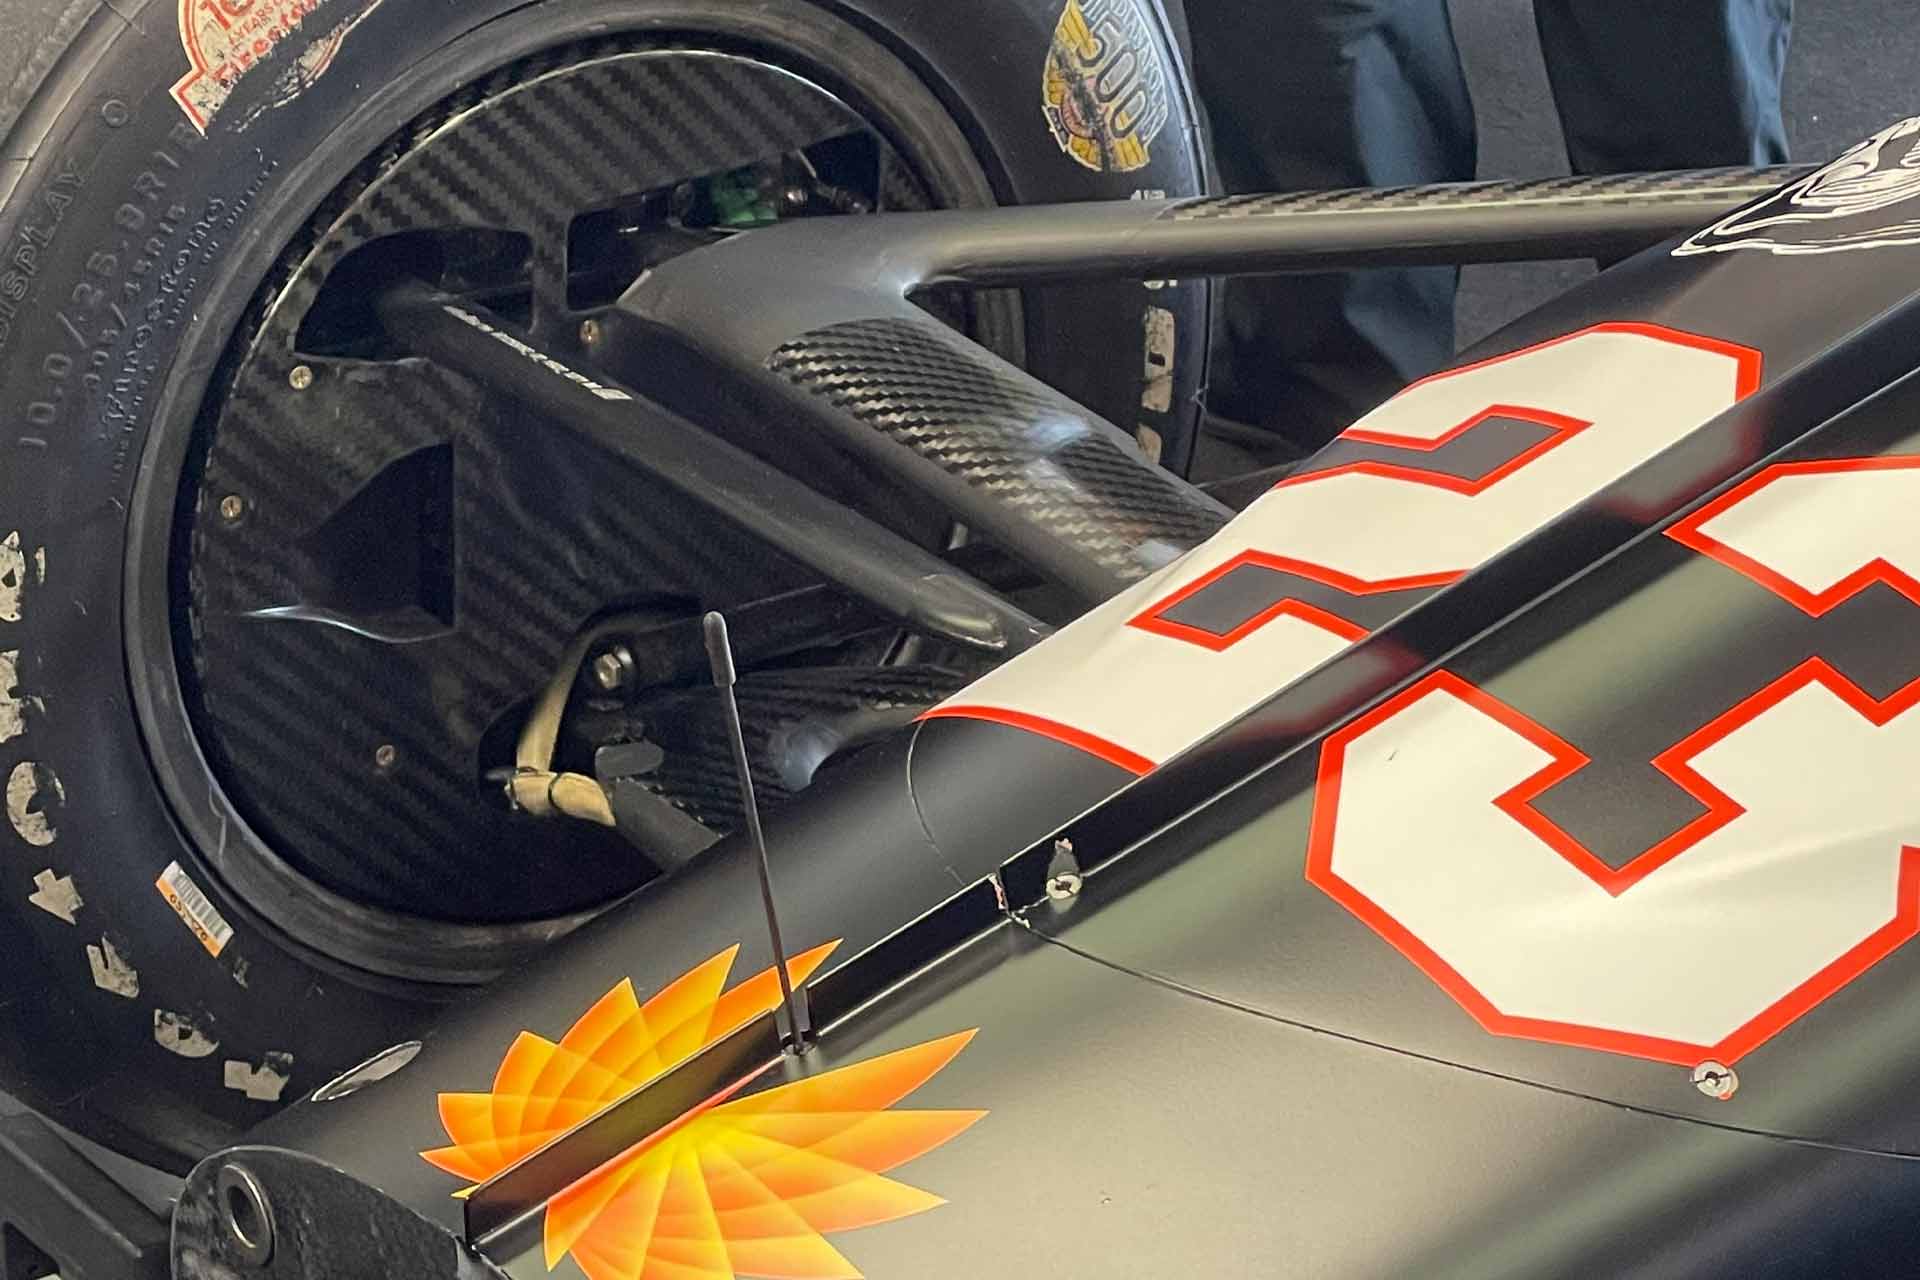 The Highs and Lows of Indy For Dreyer & Reinbold - A picture of a racing car with a tire on it, showcasing the thrill and challenges of motorsports.